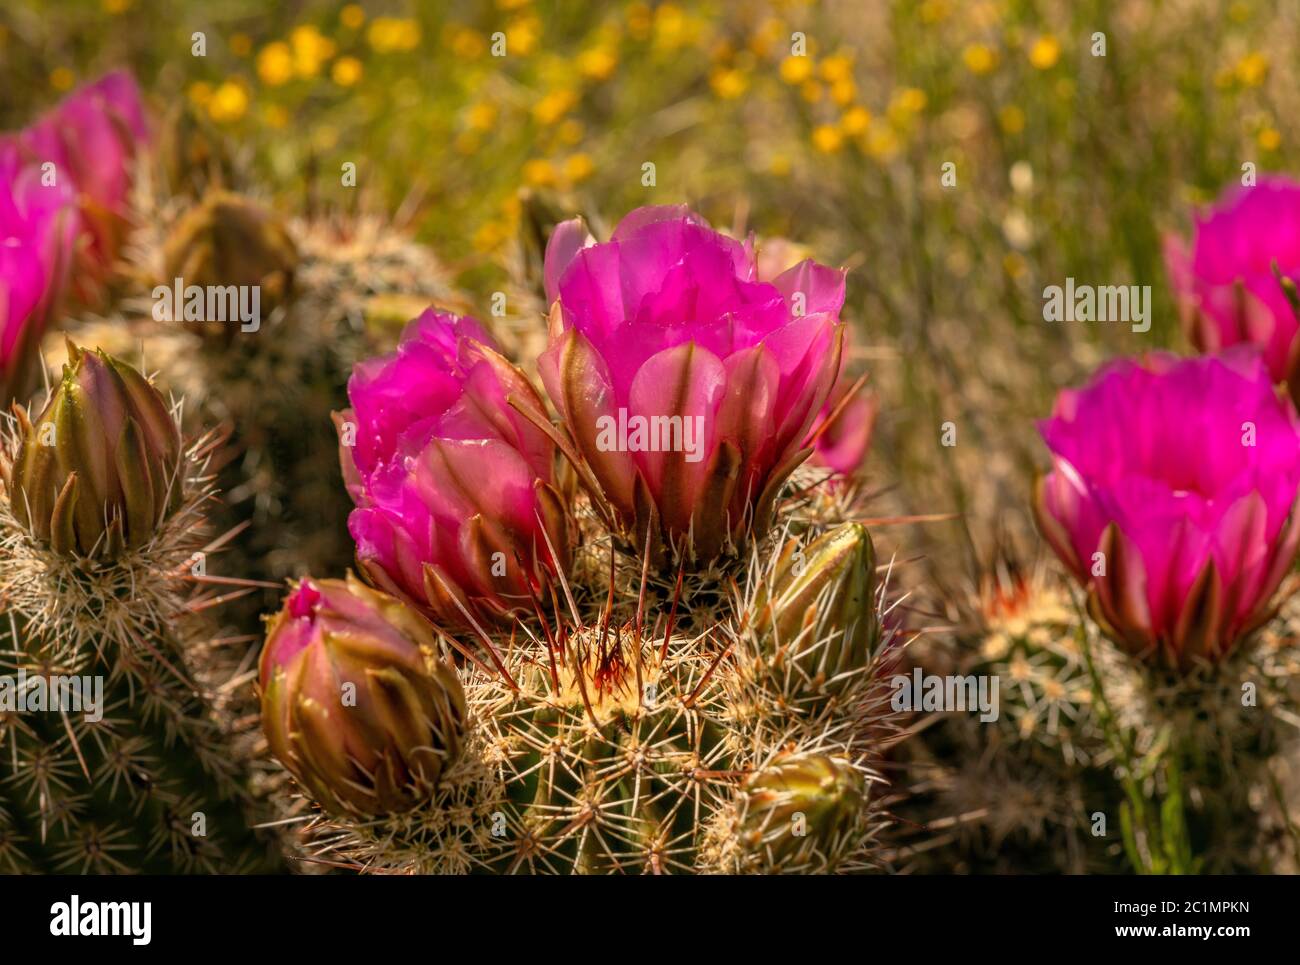 Hedgehog cactus bloom in April in the foothills of the Santa Catalina Mountains, Coronado National Forest, Sonoran Desert, Catalina, Arizona, USA. Stock Photo